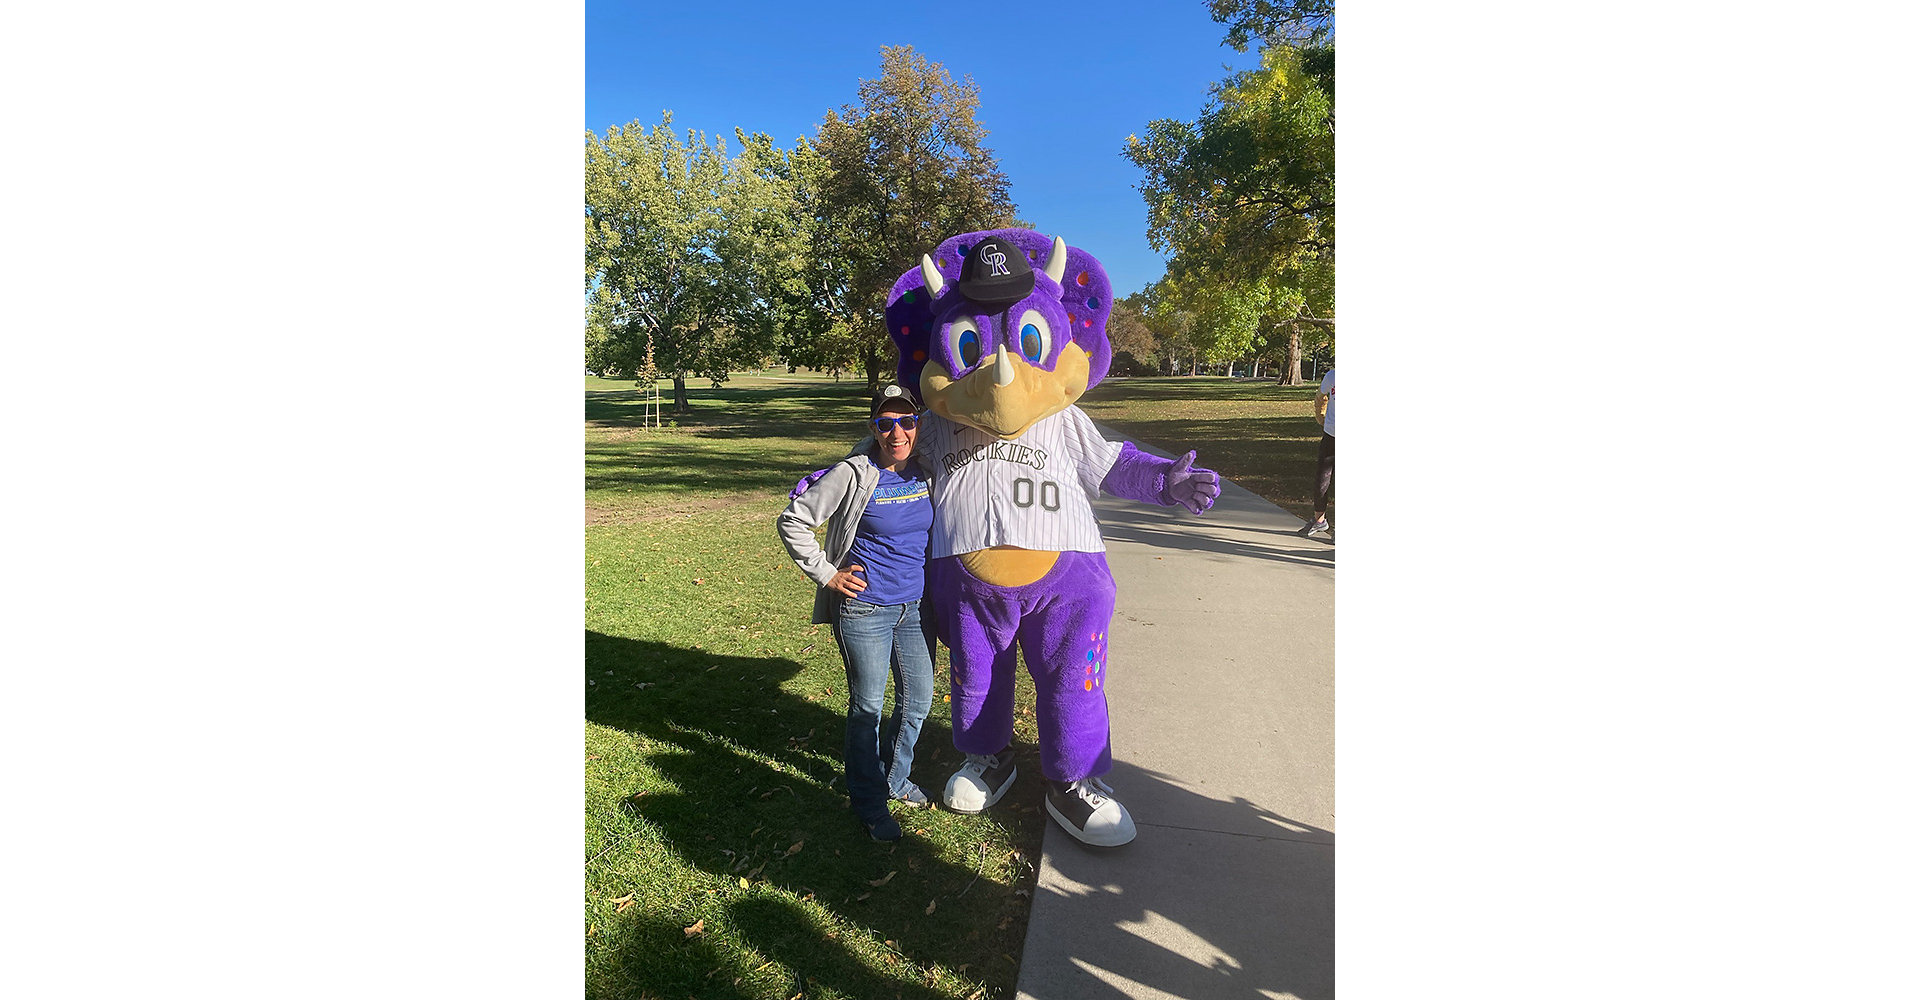 At the ALS event with the Colorado Rockies mascot